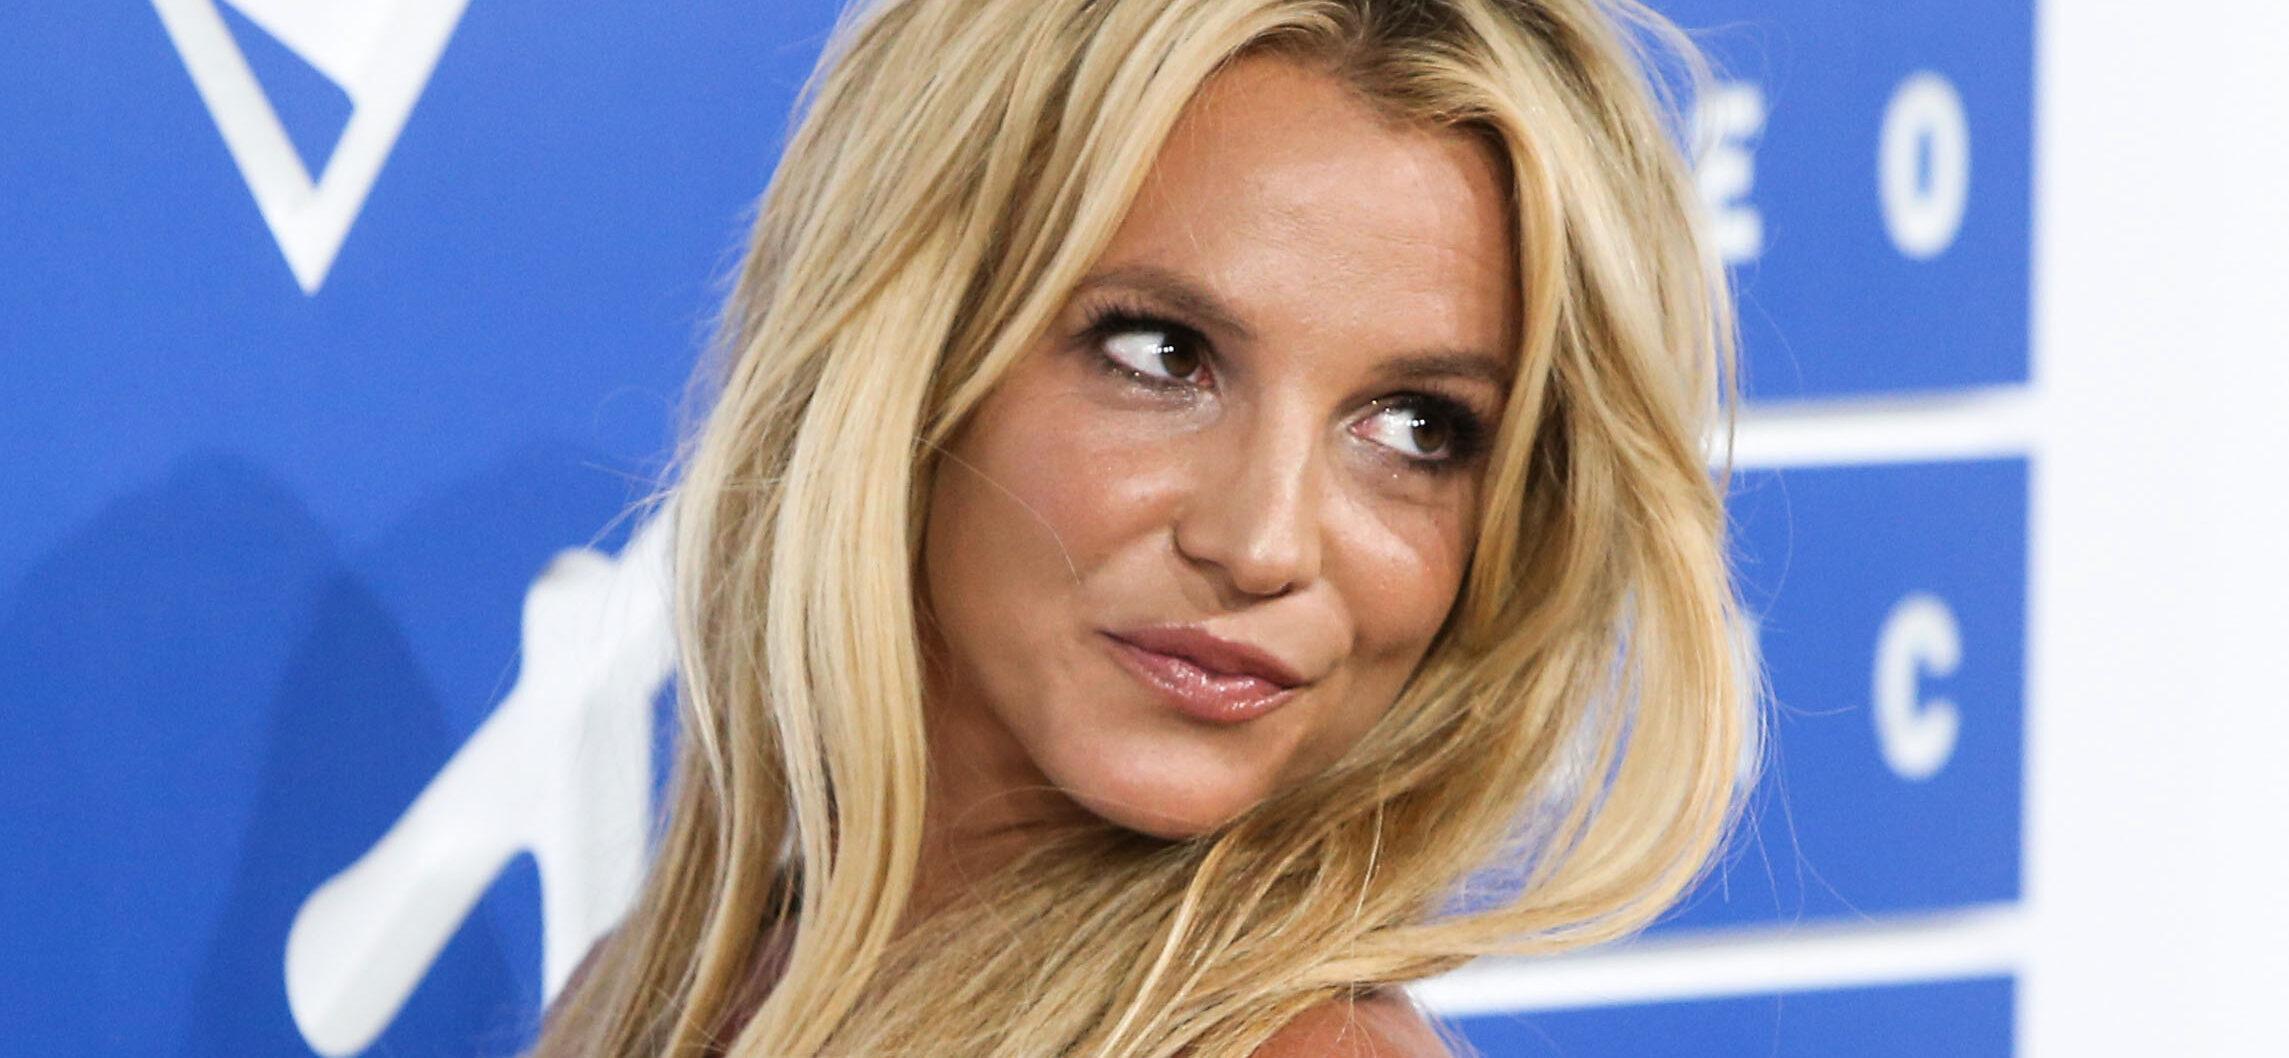 Britney Spears Says ‘I Want To Live For Me’ In Leaked Text Messages